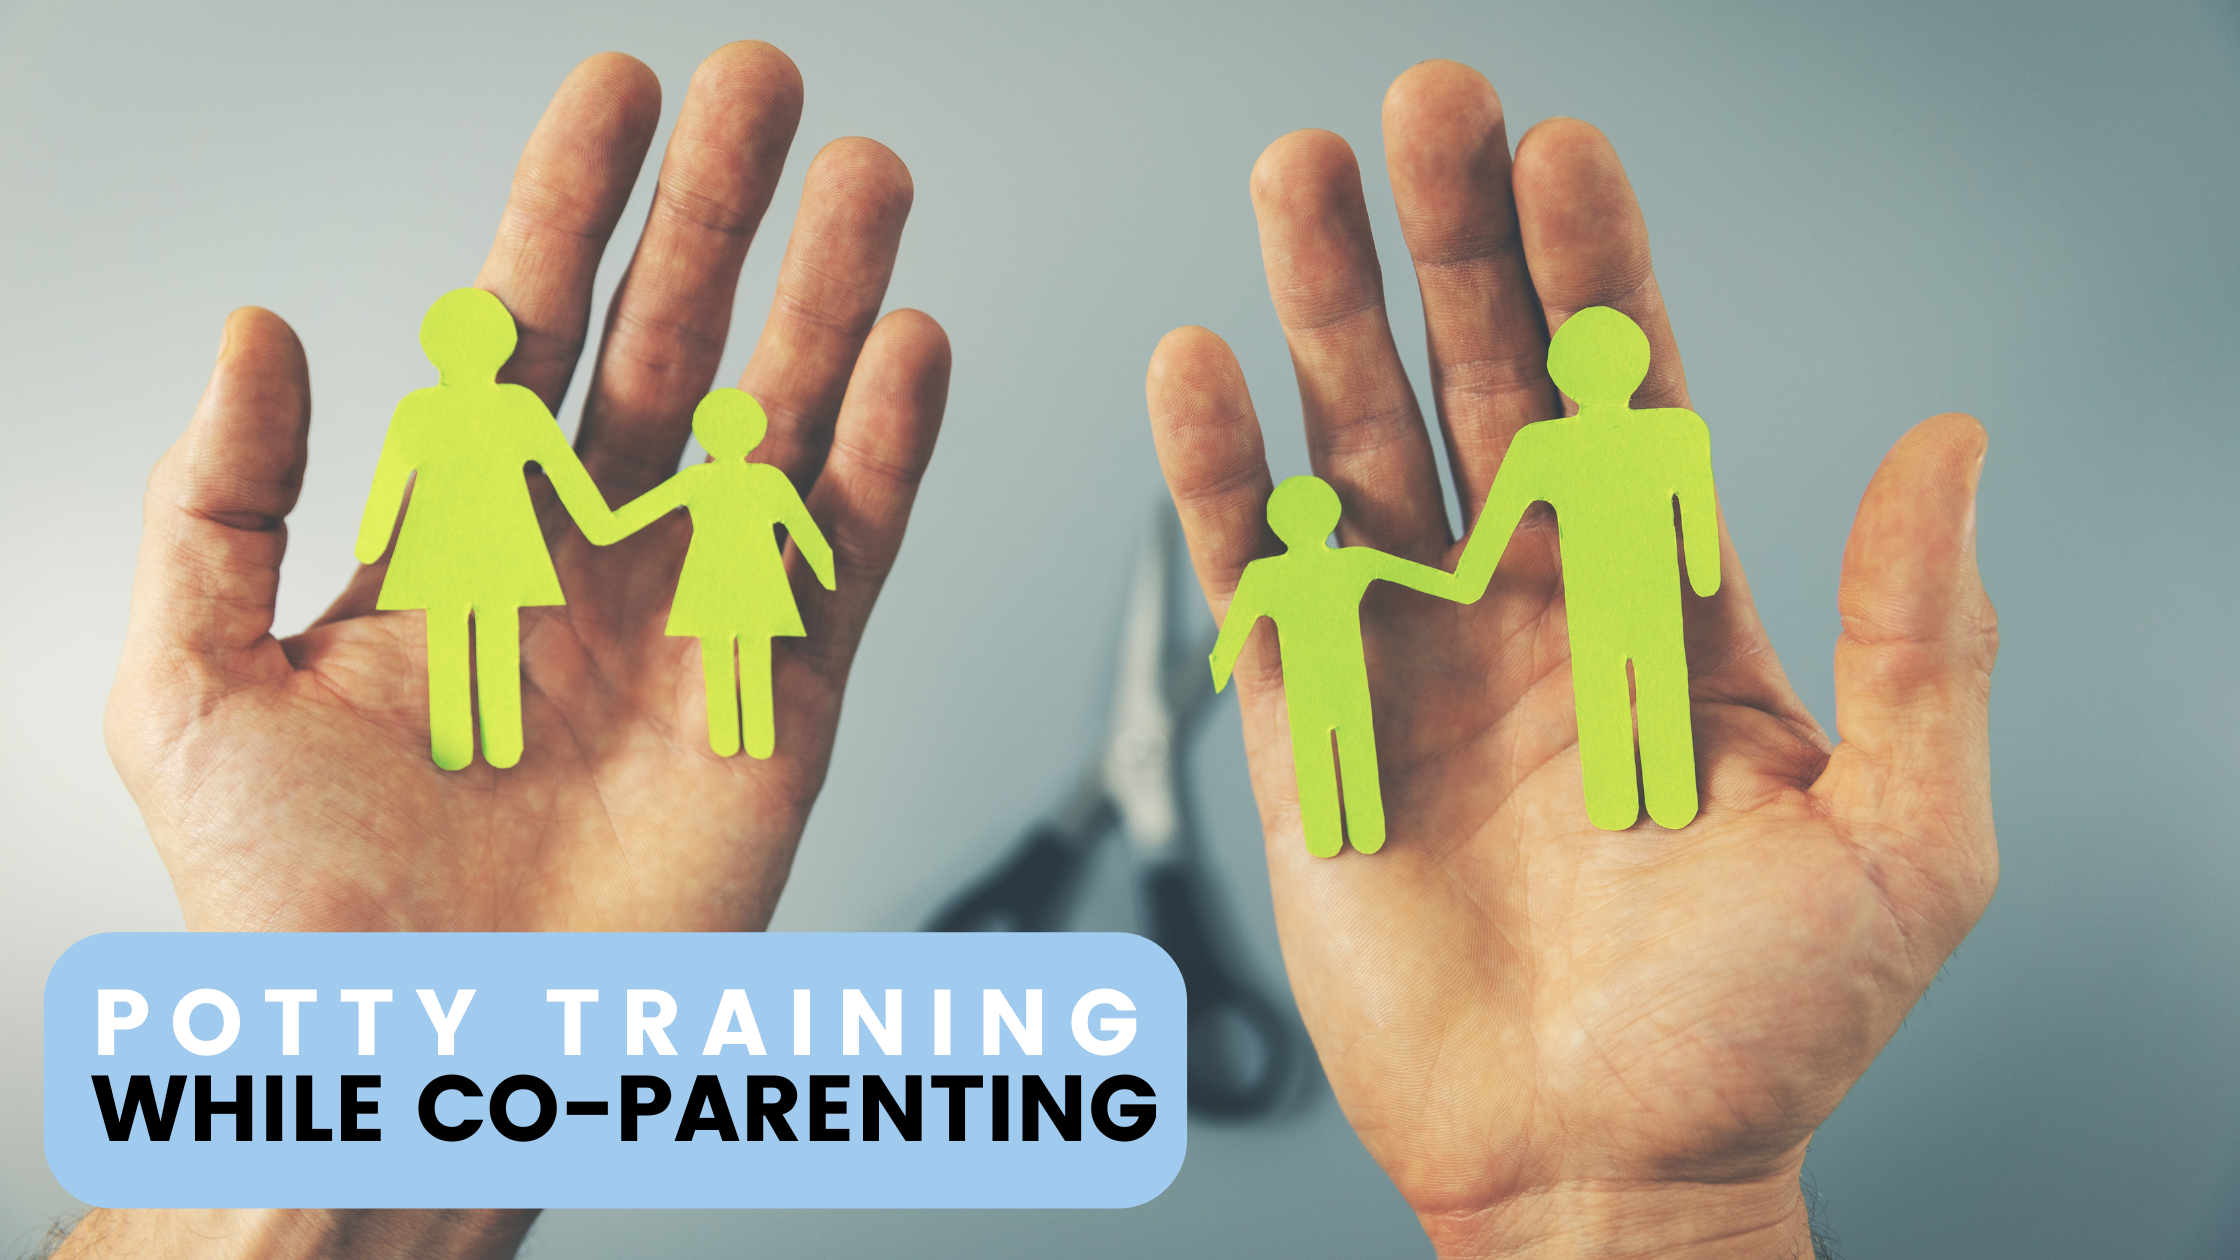 co-parenting and potty training